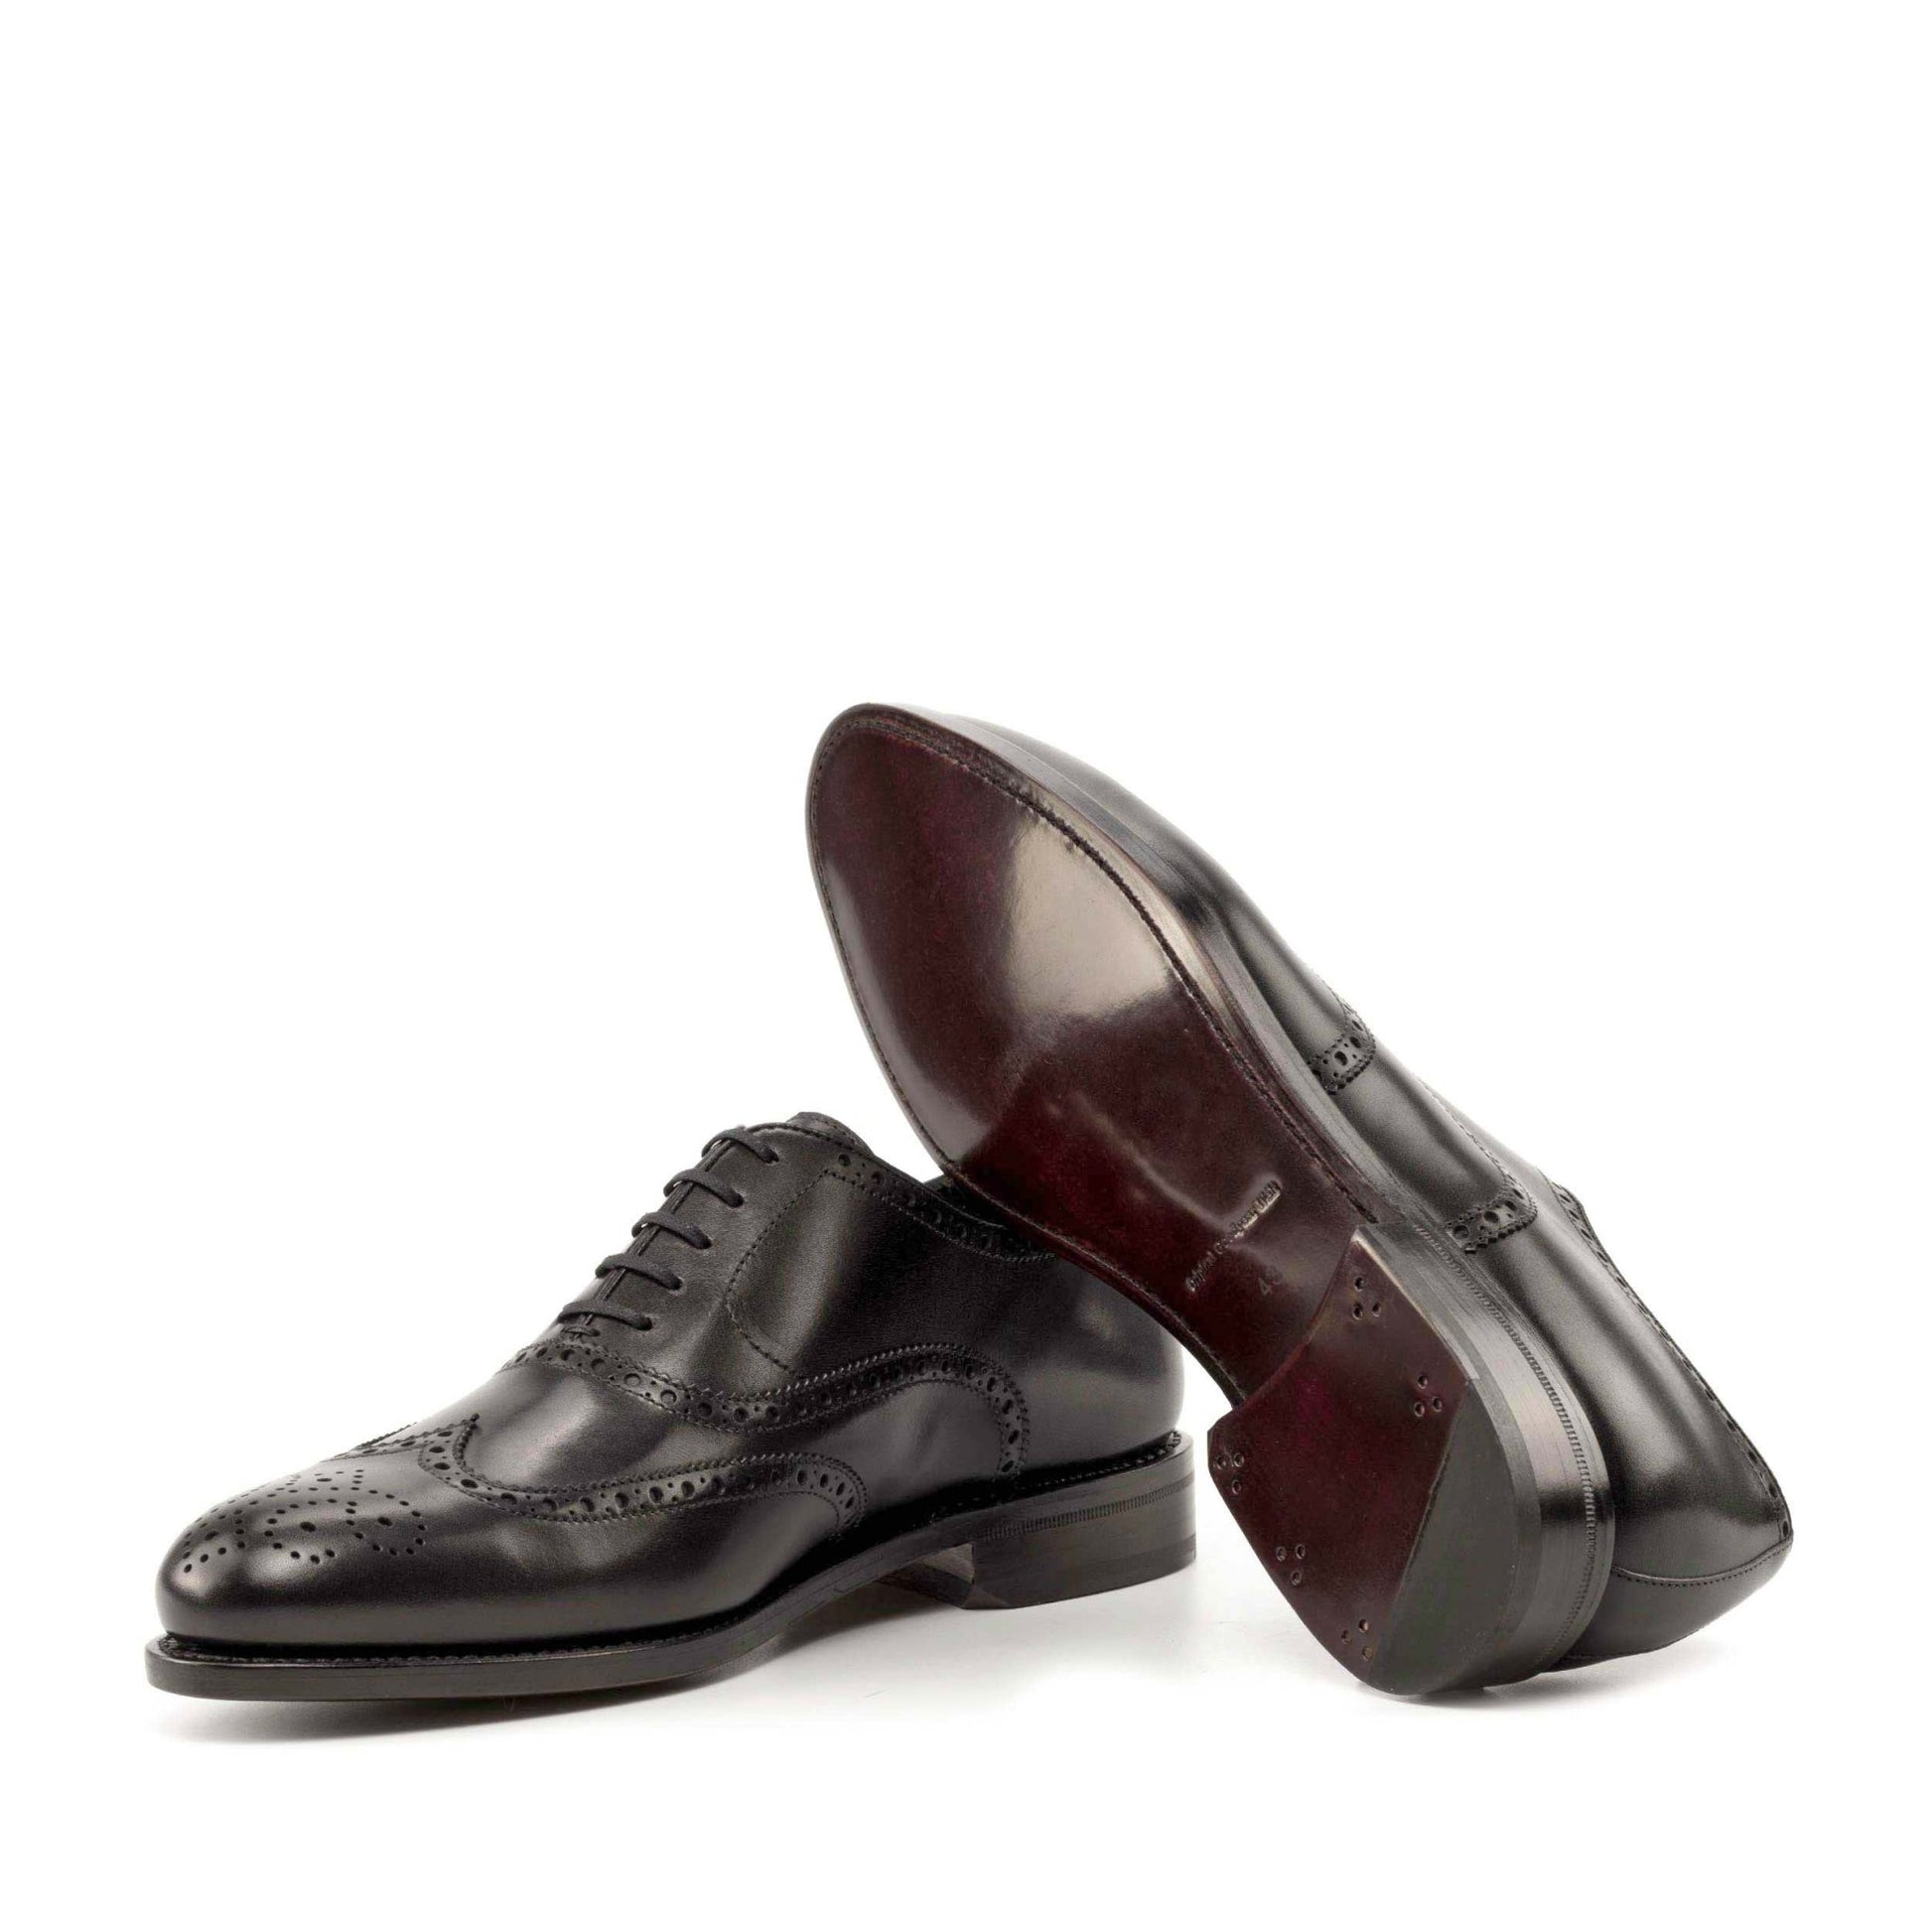 Full Brogue Oxford in Black Box Calf - Zatorres | Free Shipping on orders over $200